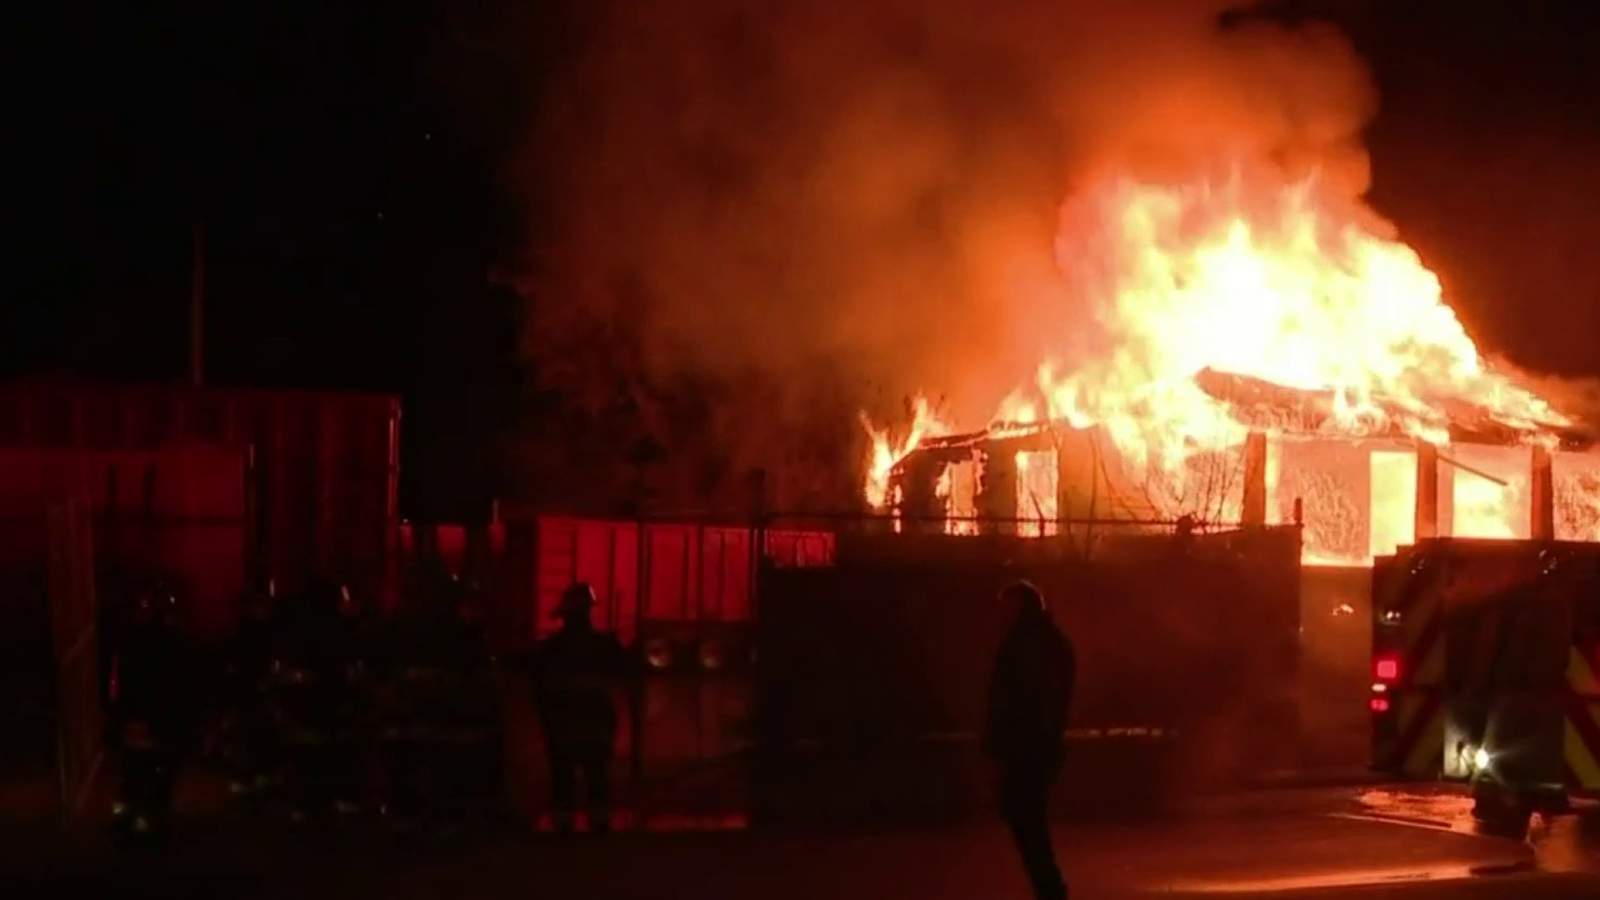 Firefighters work to keep flames away from Hamtramck business